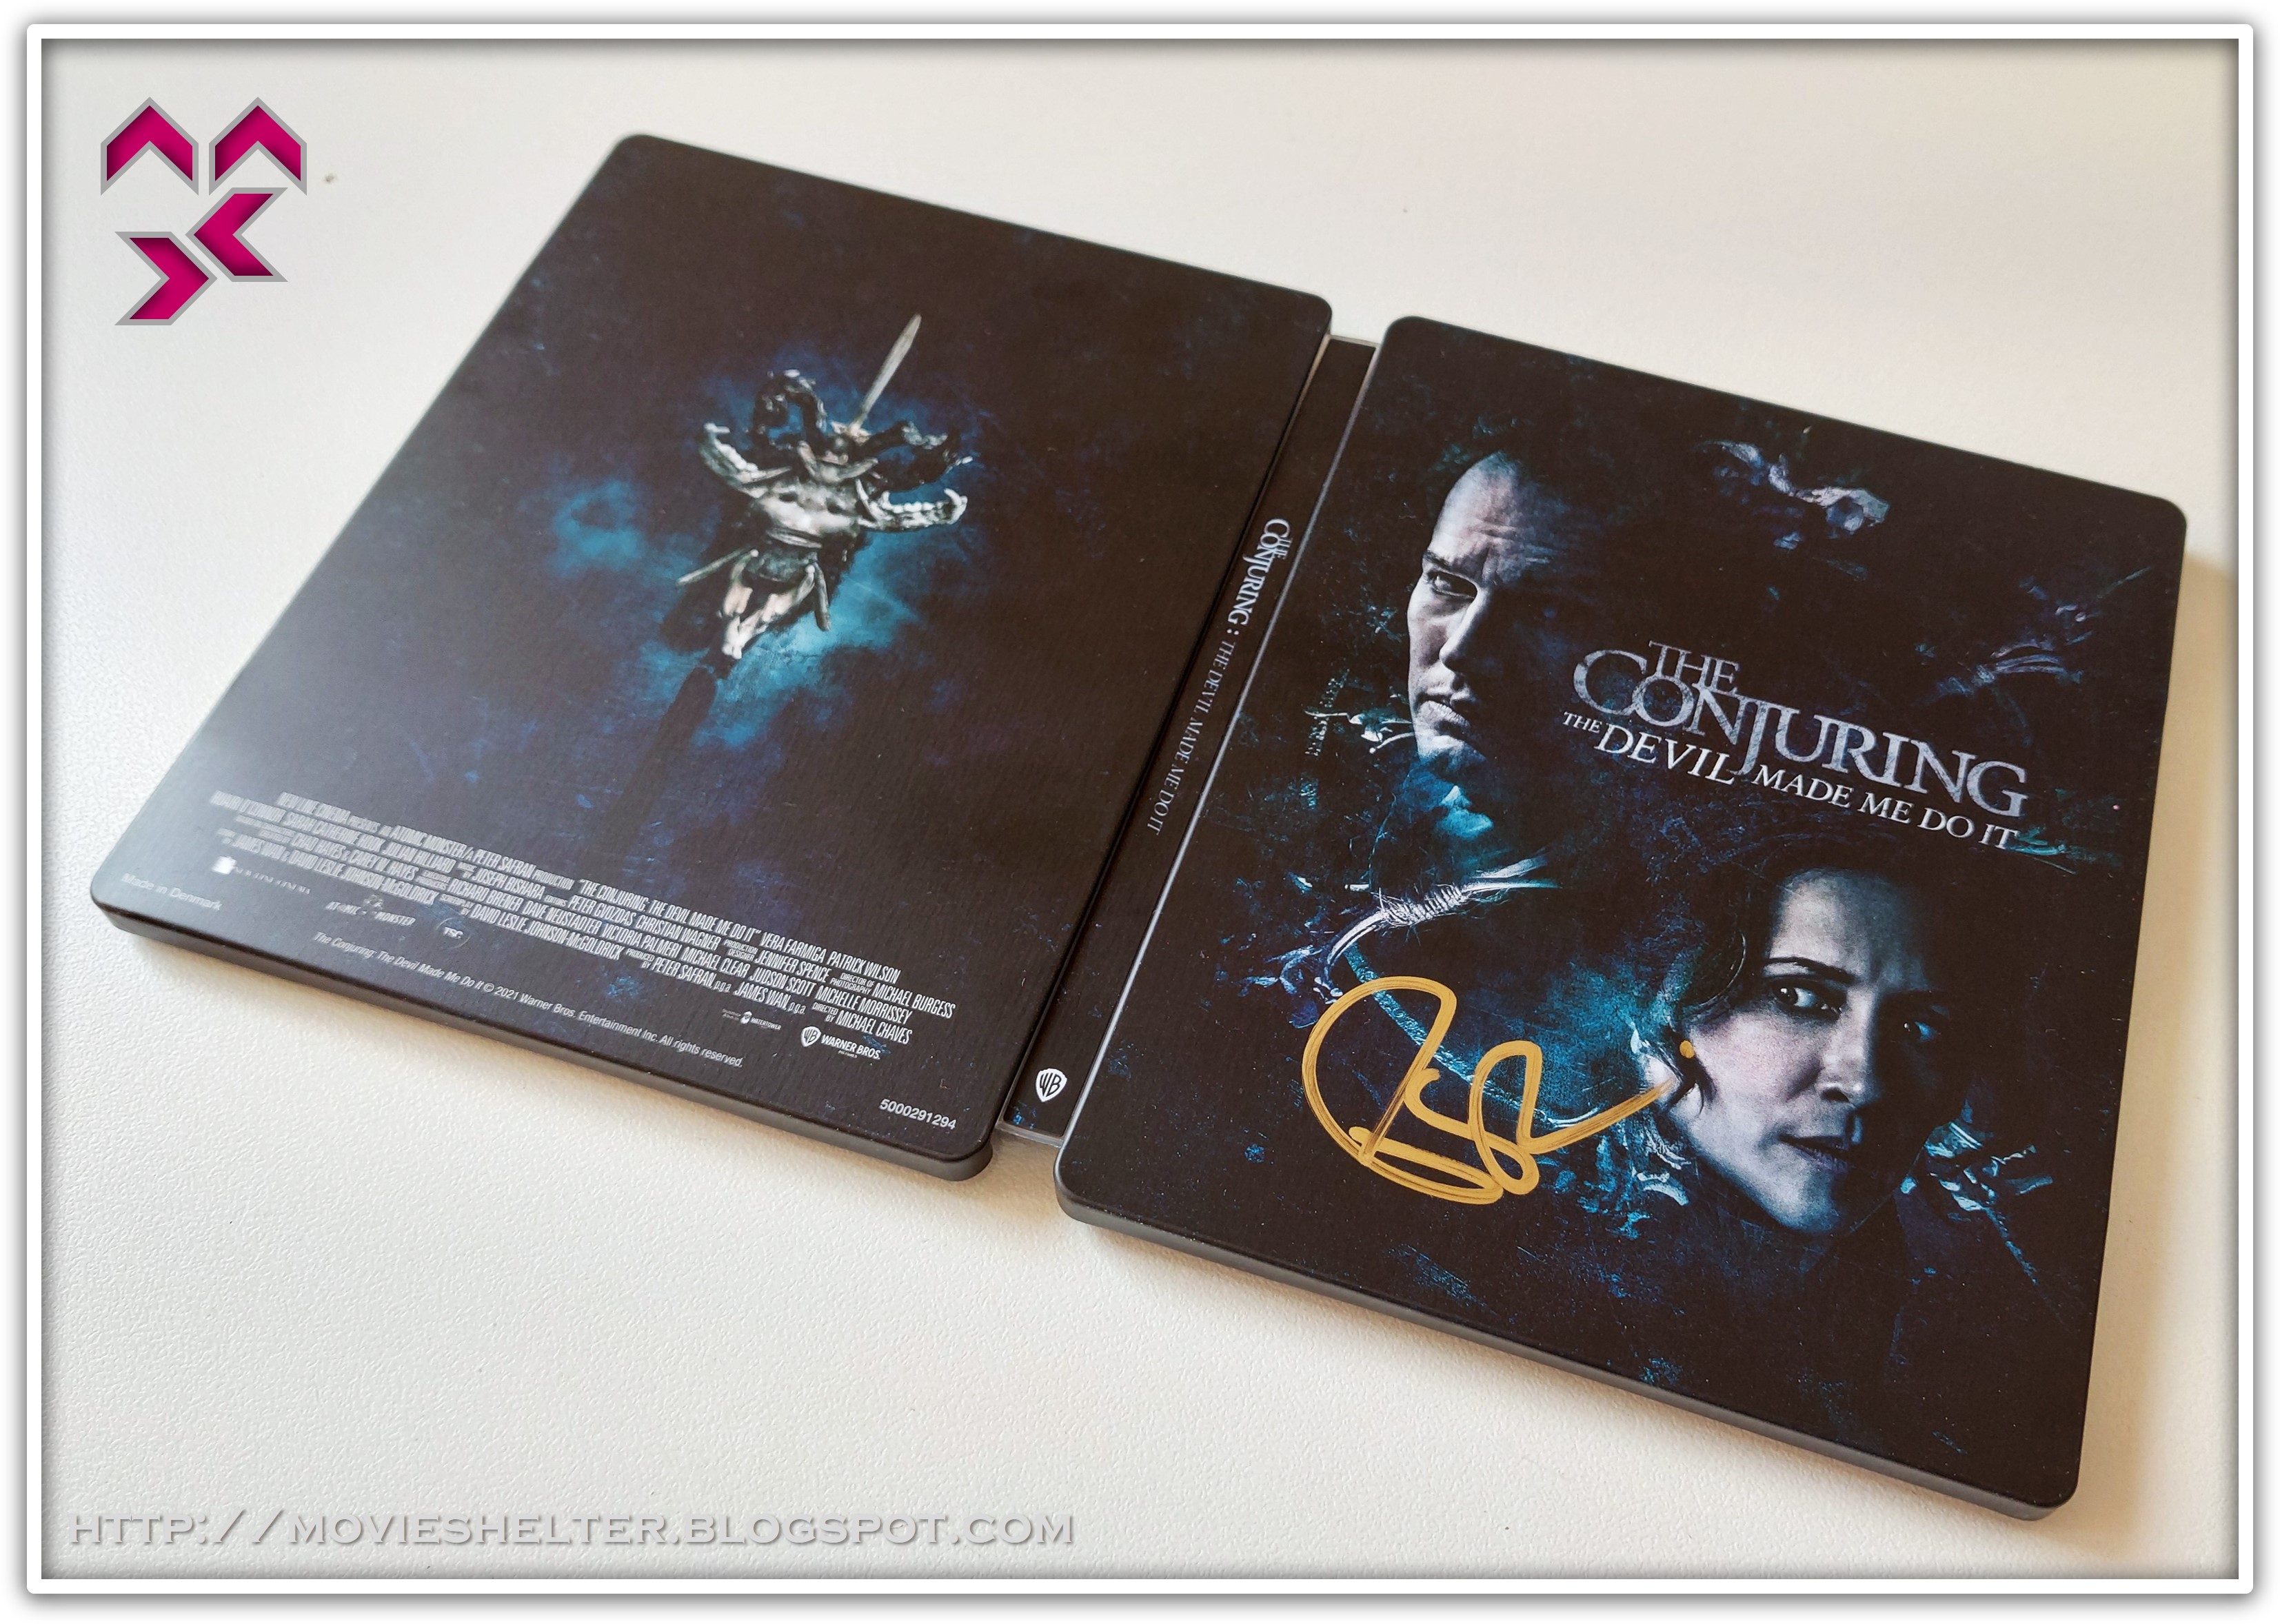 Conjuring_3_The_Devil_Made_Me_Do_It_Limited_Steelbook_Edition_signed_by_Patrick_Wilson_03.jpg